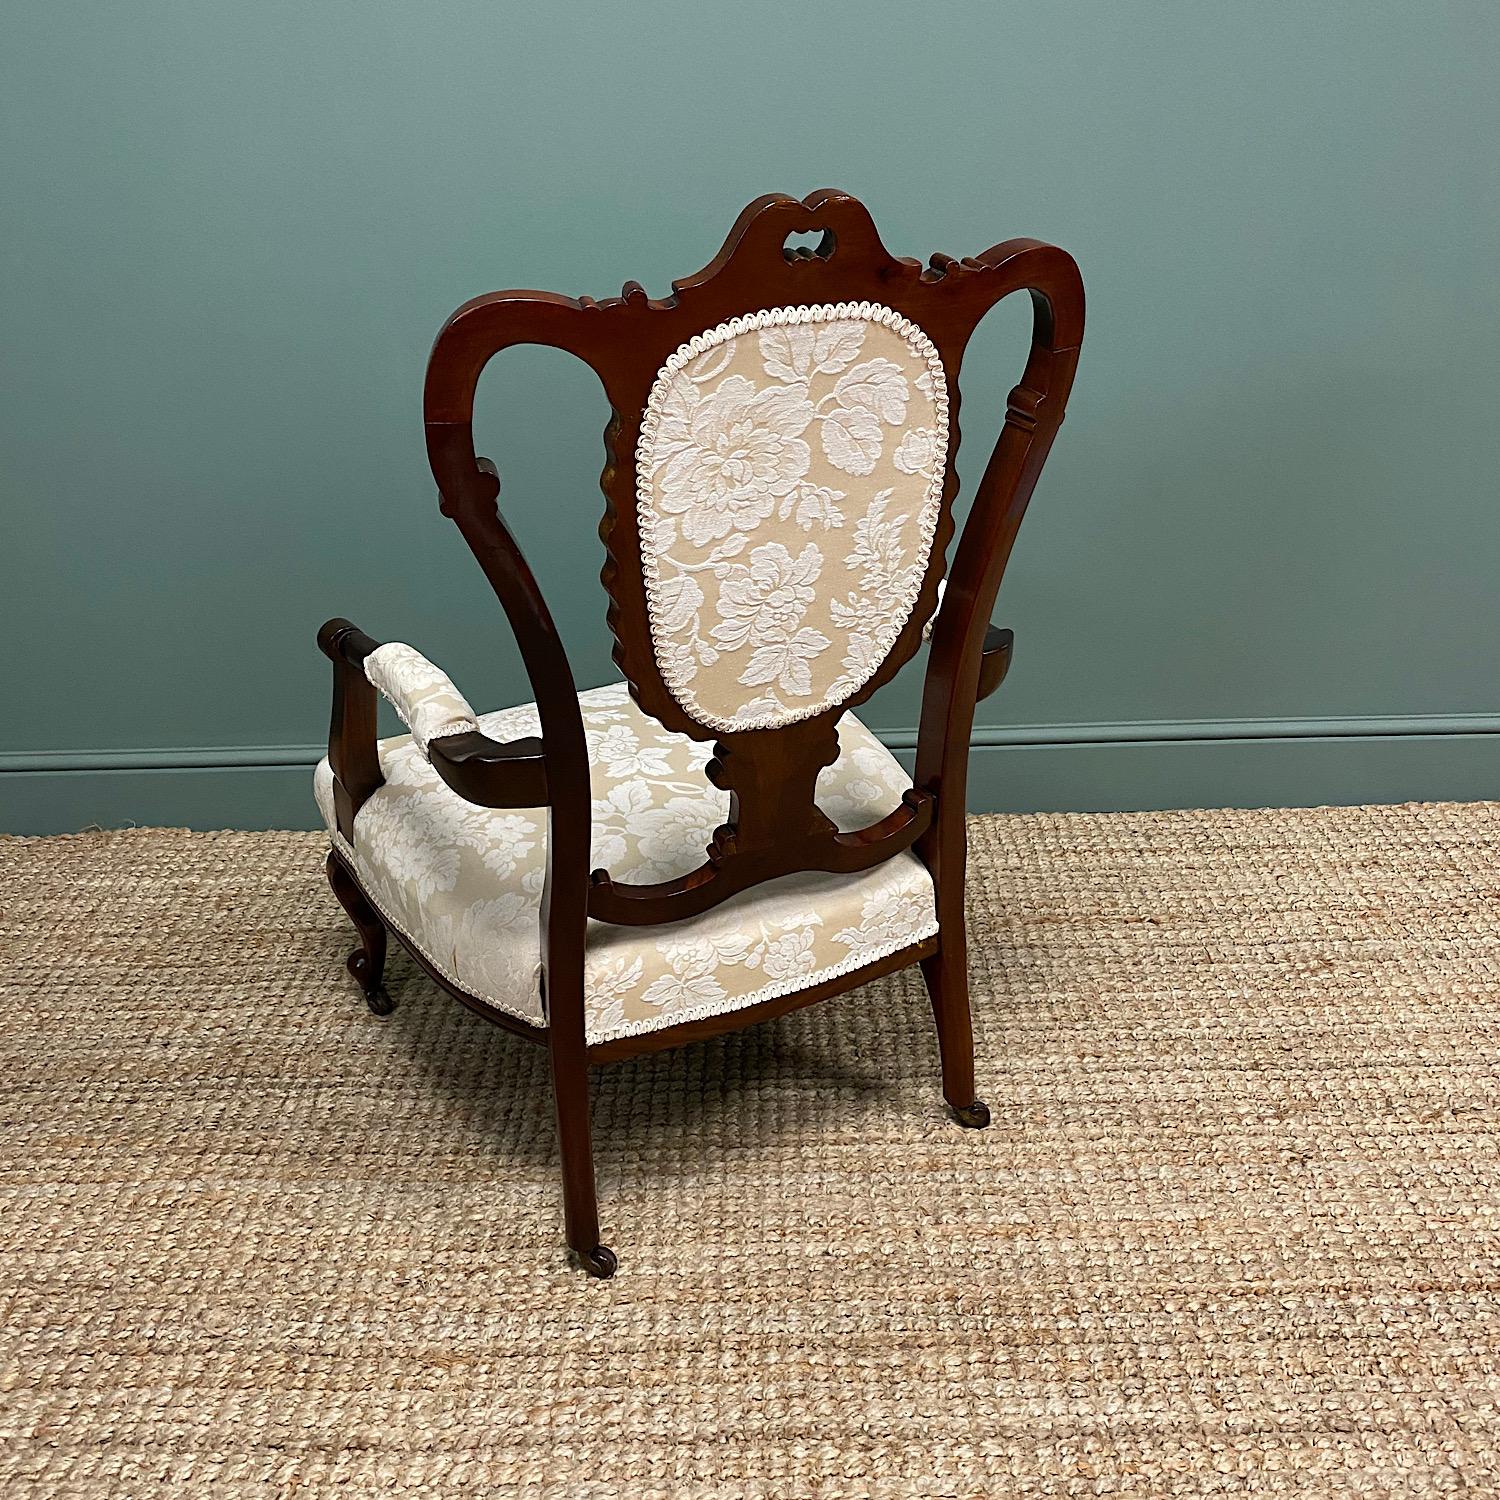 Elegant 19th Century Victorian Upholstered Antique Arm Chair For Sale 1